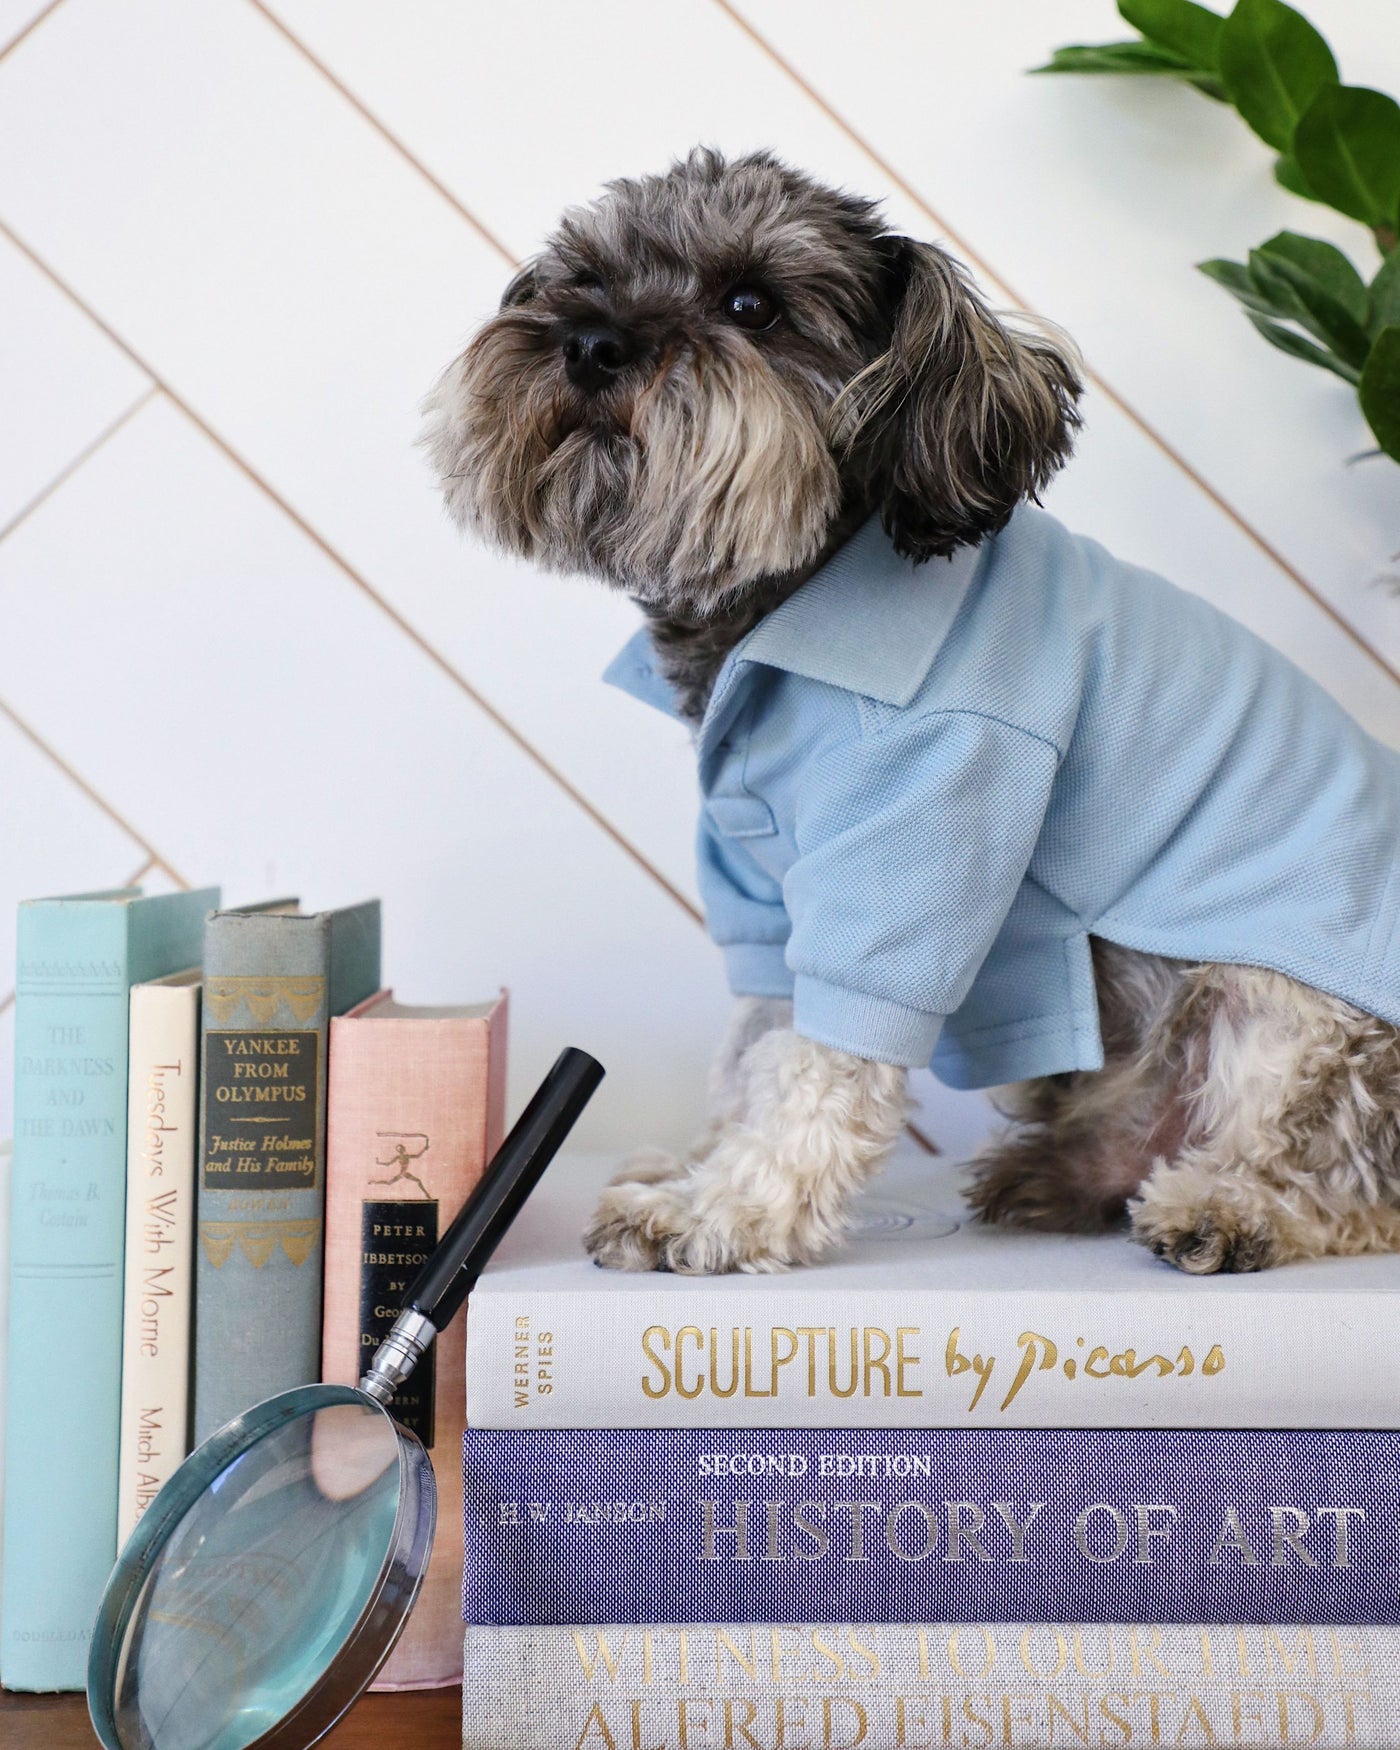 Cute dog wearing baby blue polo while sitting on stack of books